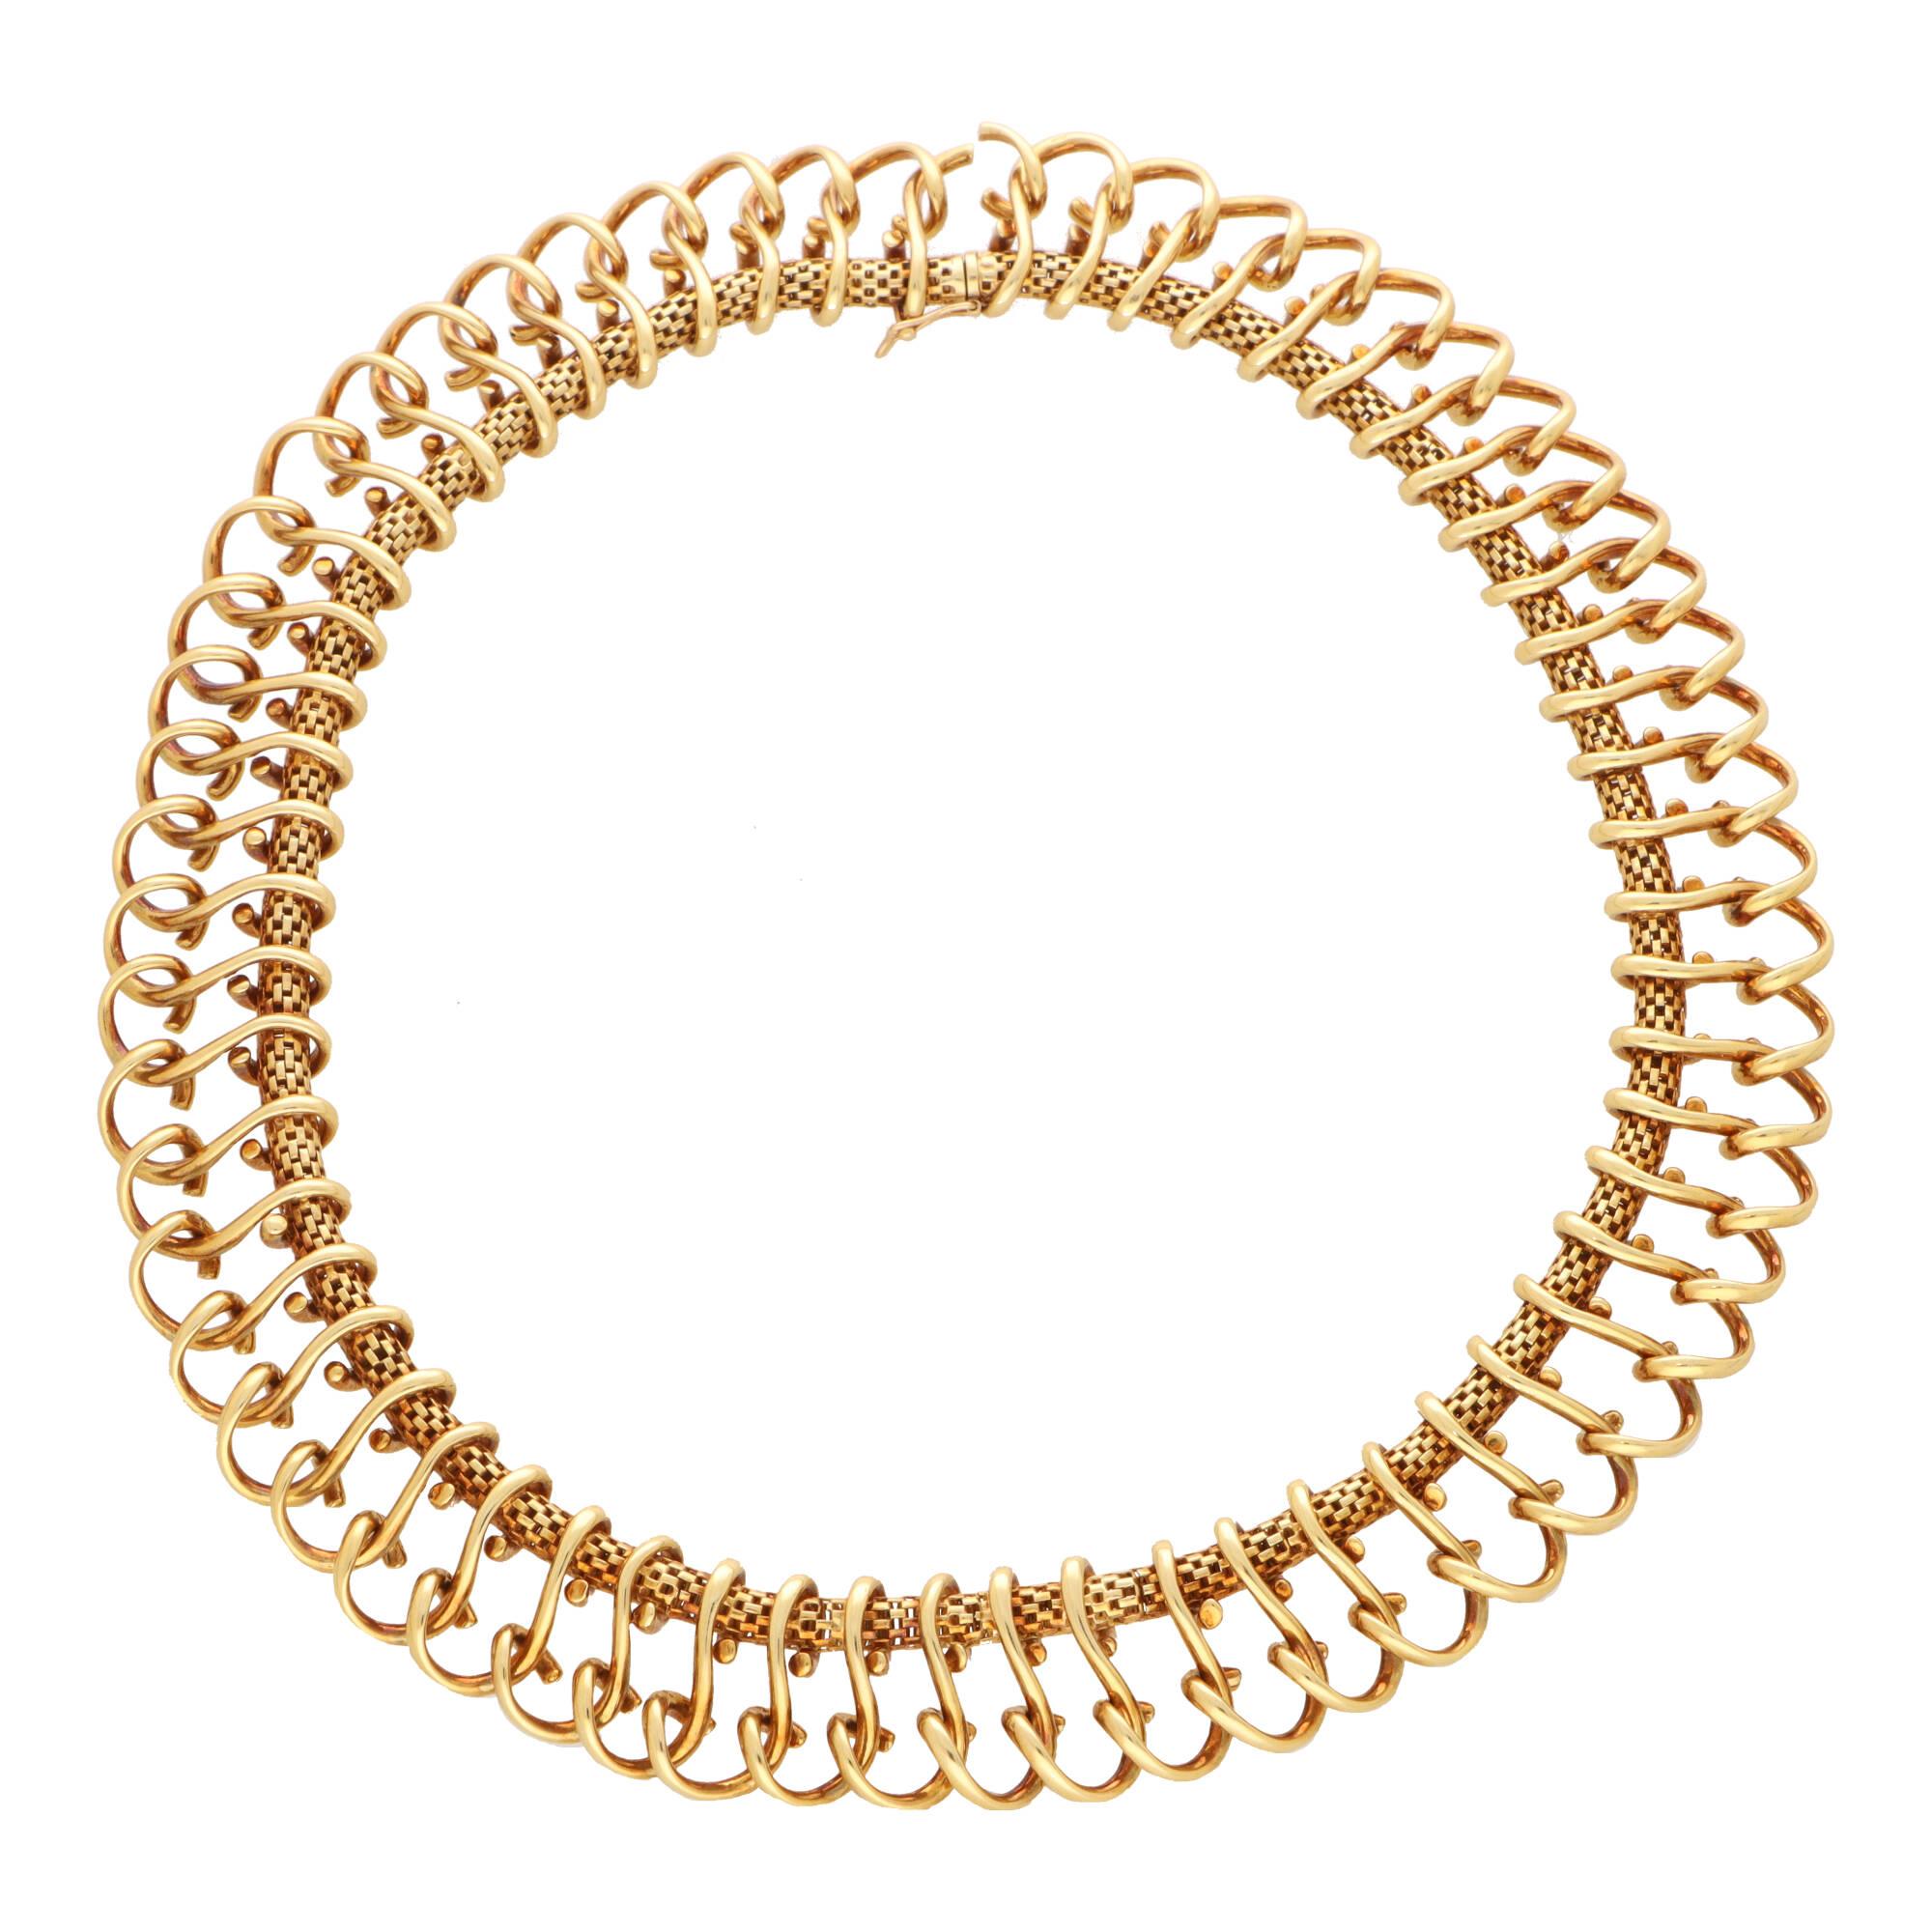 A beautiful vintage French chunky necklace set in 18k yellow gold.

The necklace is firstly composed of a mesh gold rope which acts as the base for the decorative design. Exactly 69 stylized solid gold loops hang from the gold mesh base and are all